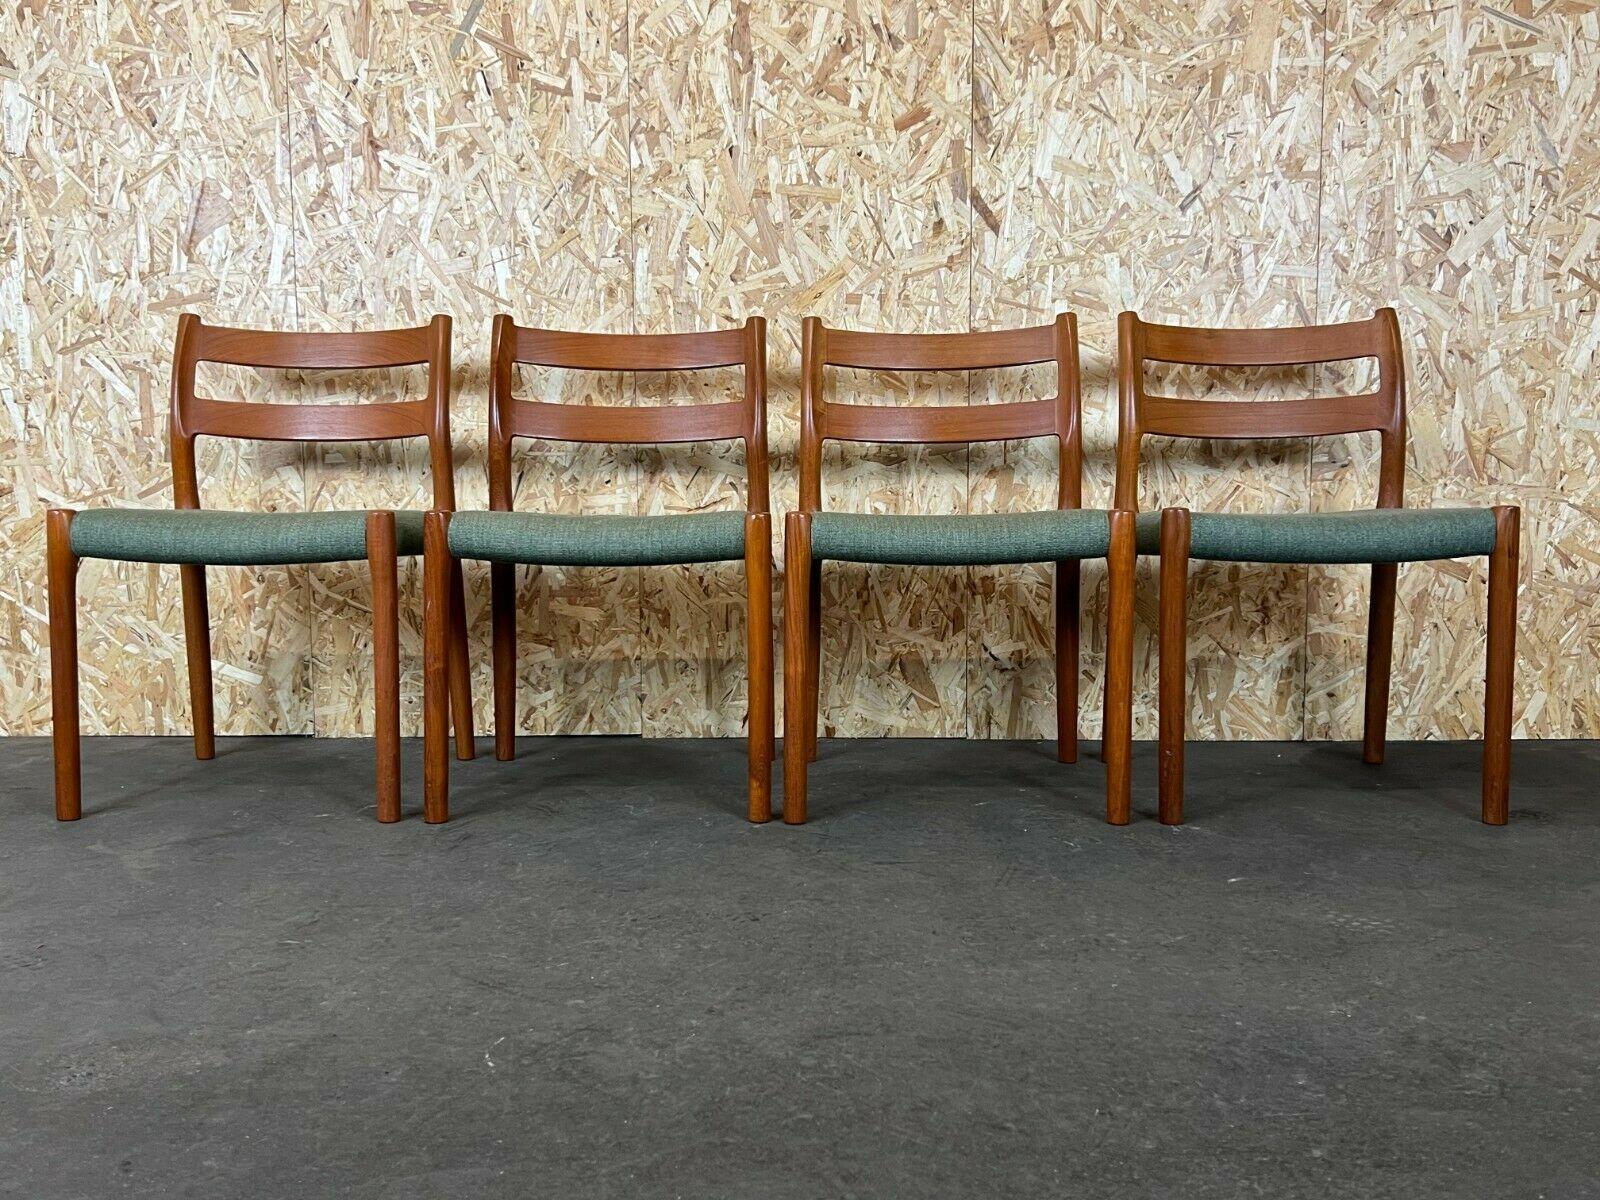 4x 60s 70s Chairs teak dining chair Niels O. Möller for J.L. Moller's 60s

Object: 4x chair

Manufacturer: J.L. Mollers

Condition: good

Age: around 1960-1970

Dimensions:

50.5cm x 51cm x 78.5cm
Seat height = 44cm

Other